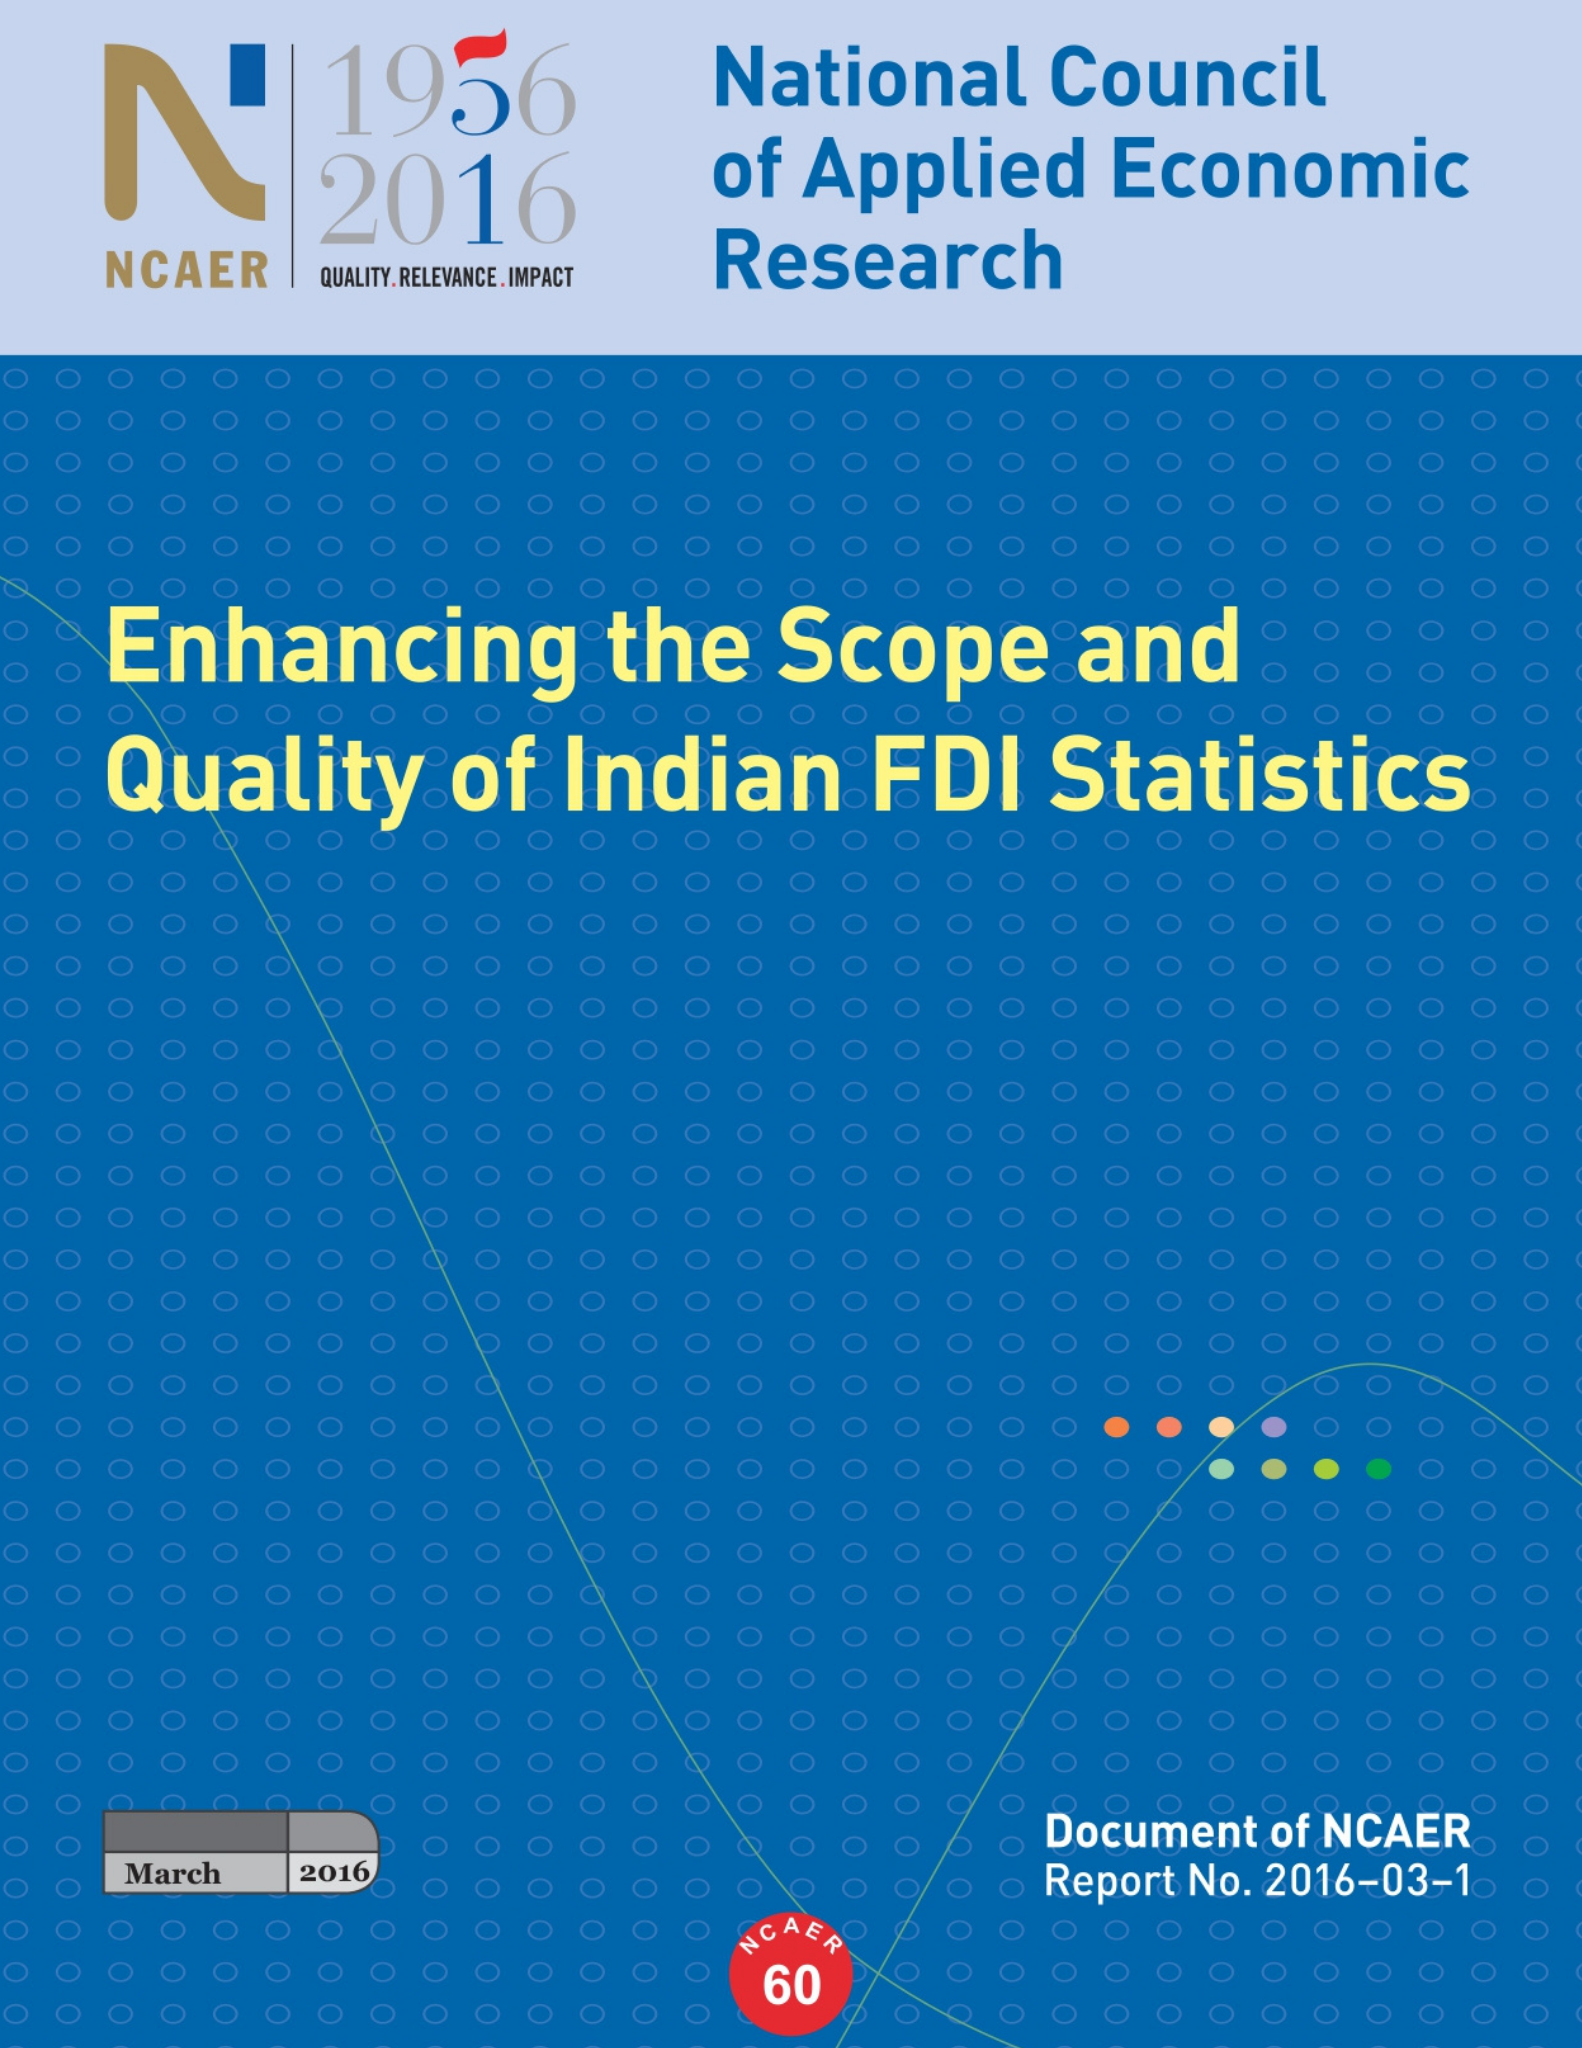 14666Enhancing the Scope and Quality of Indian FDI Statistics